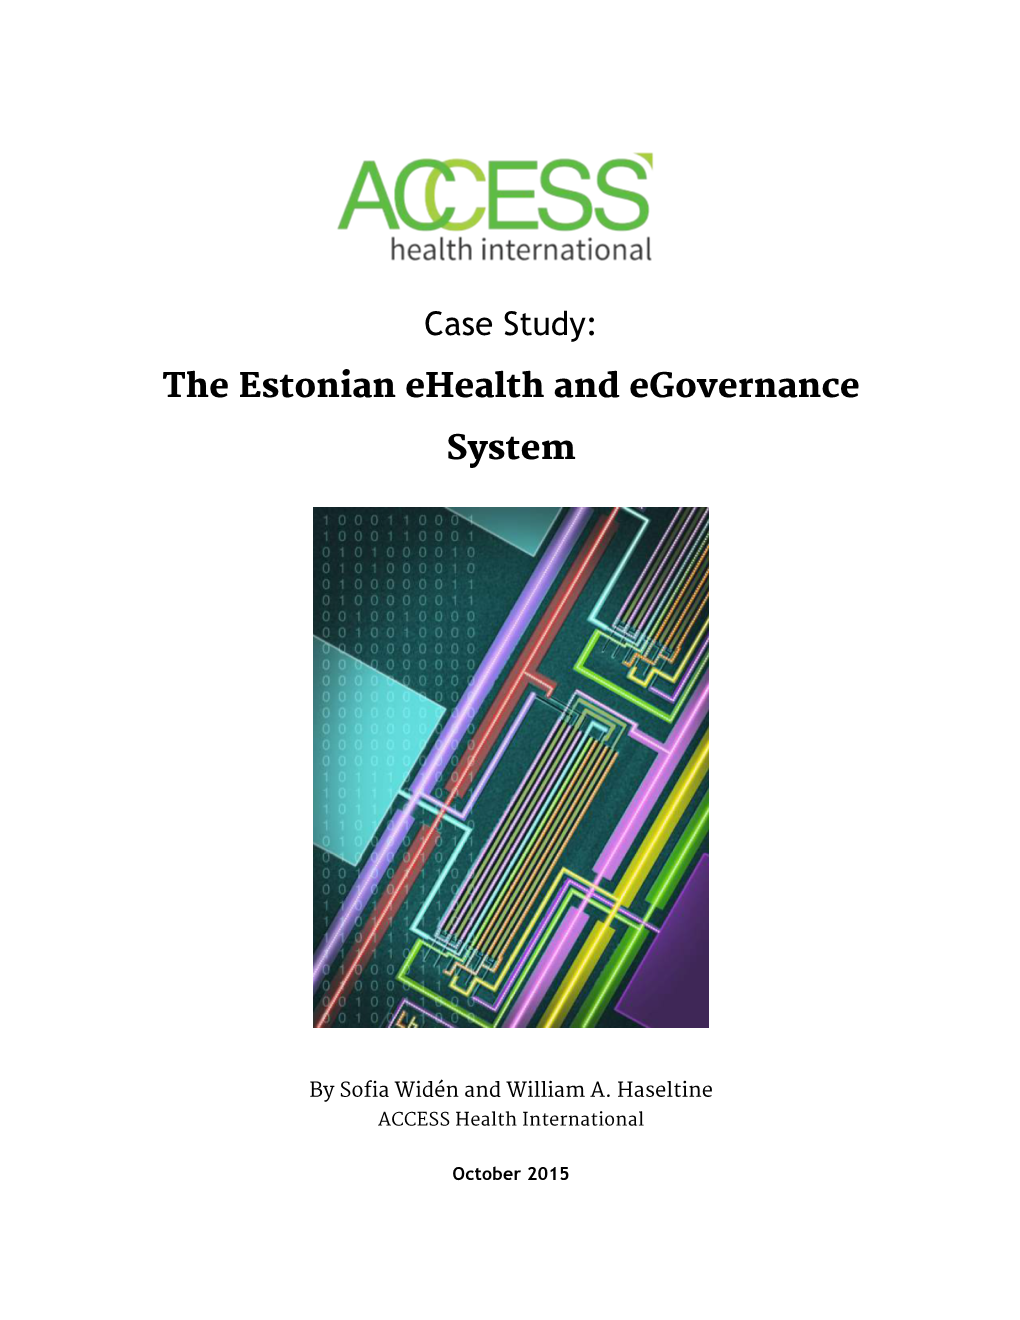 Case Study: the Estonian Ehealth and Egovernance System